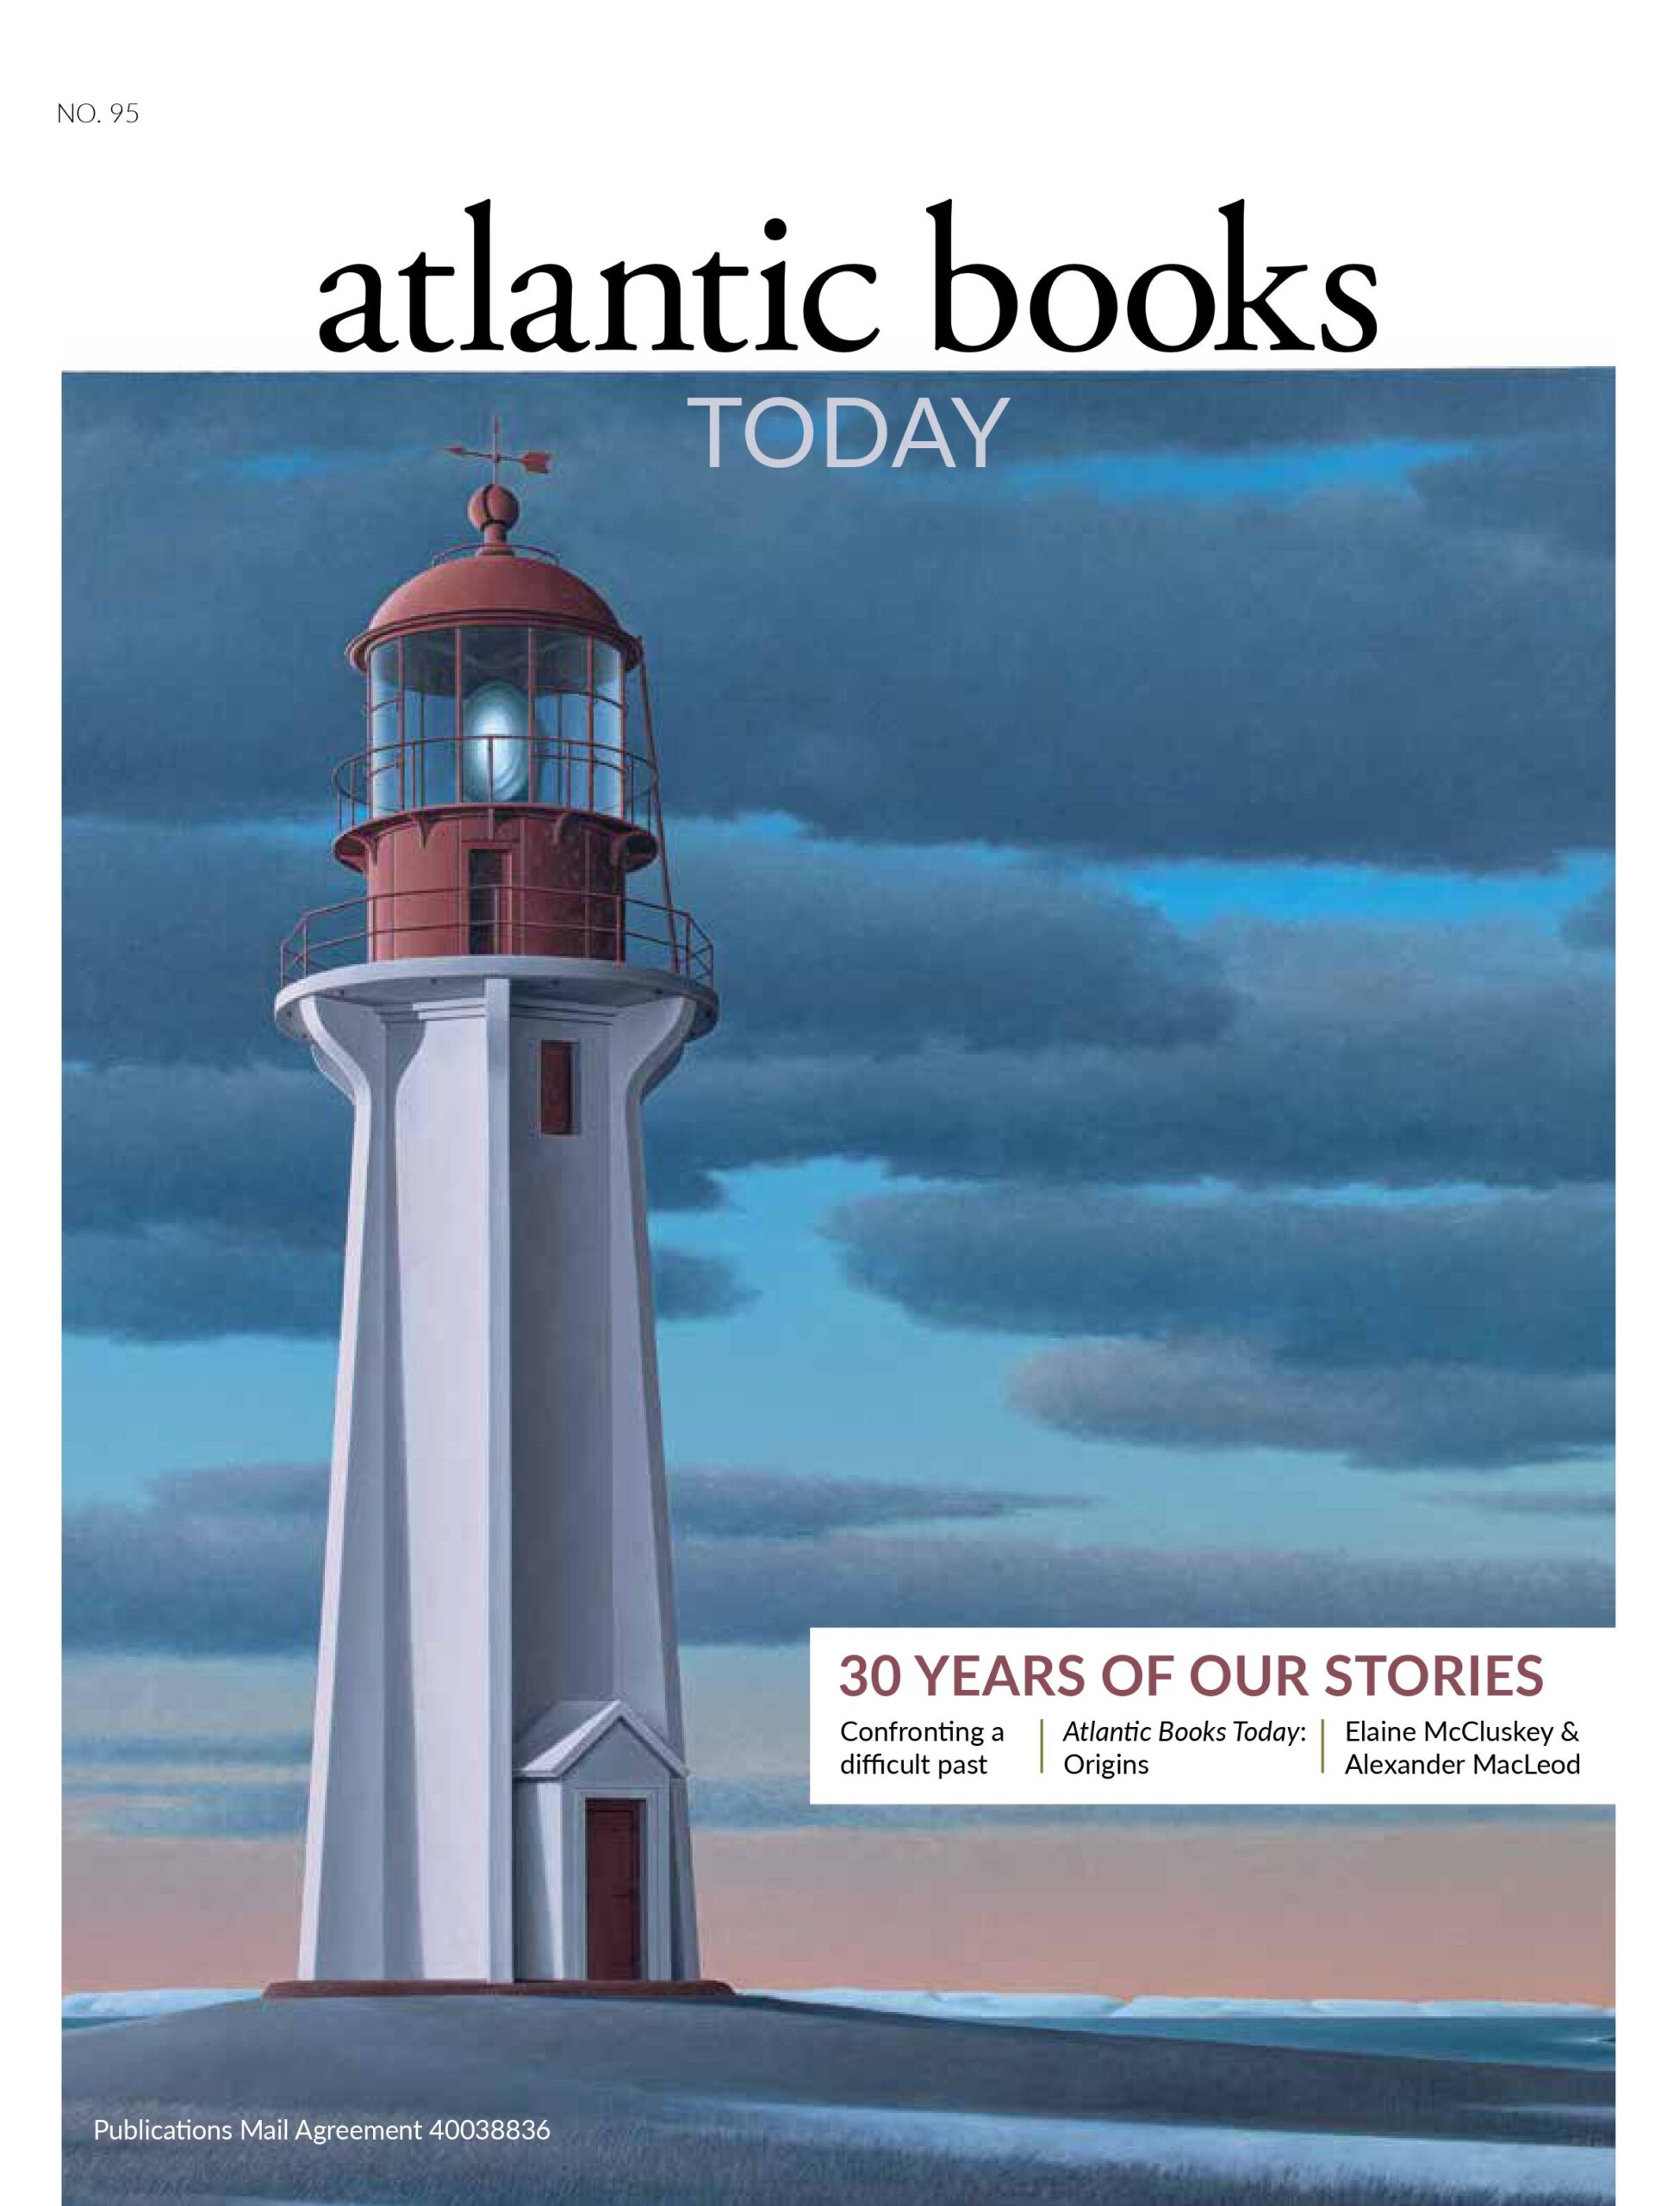 Atlantic Books Today Celebrates 30 Years of Talking About Atlantic Books